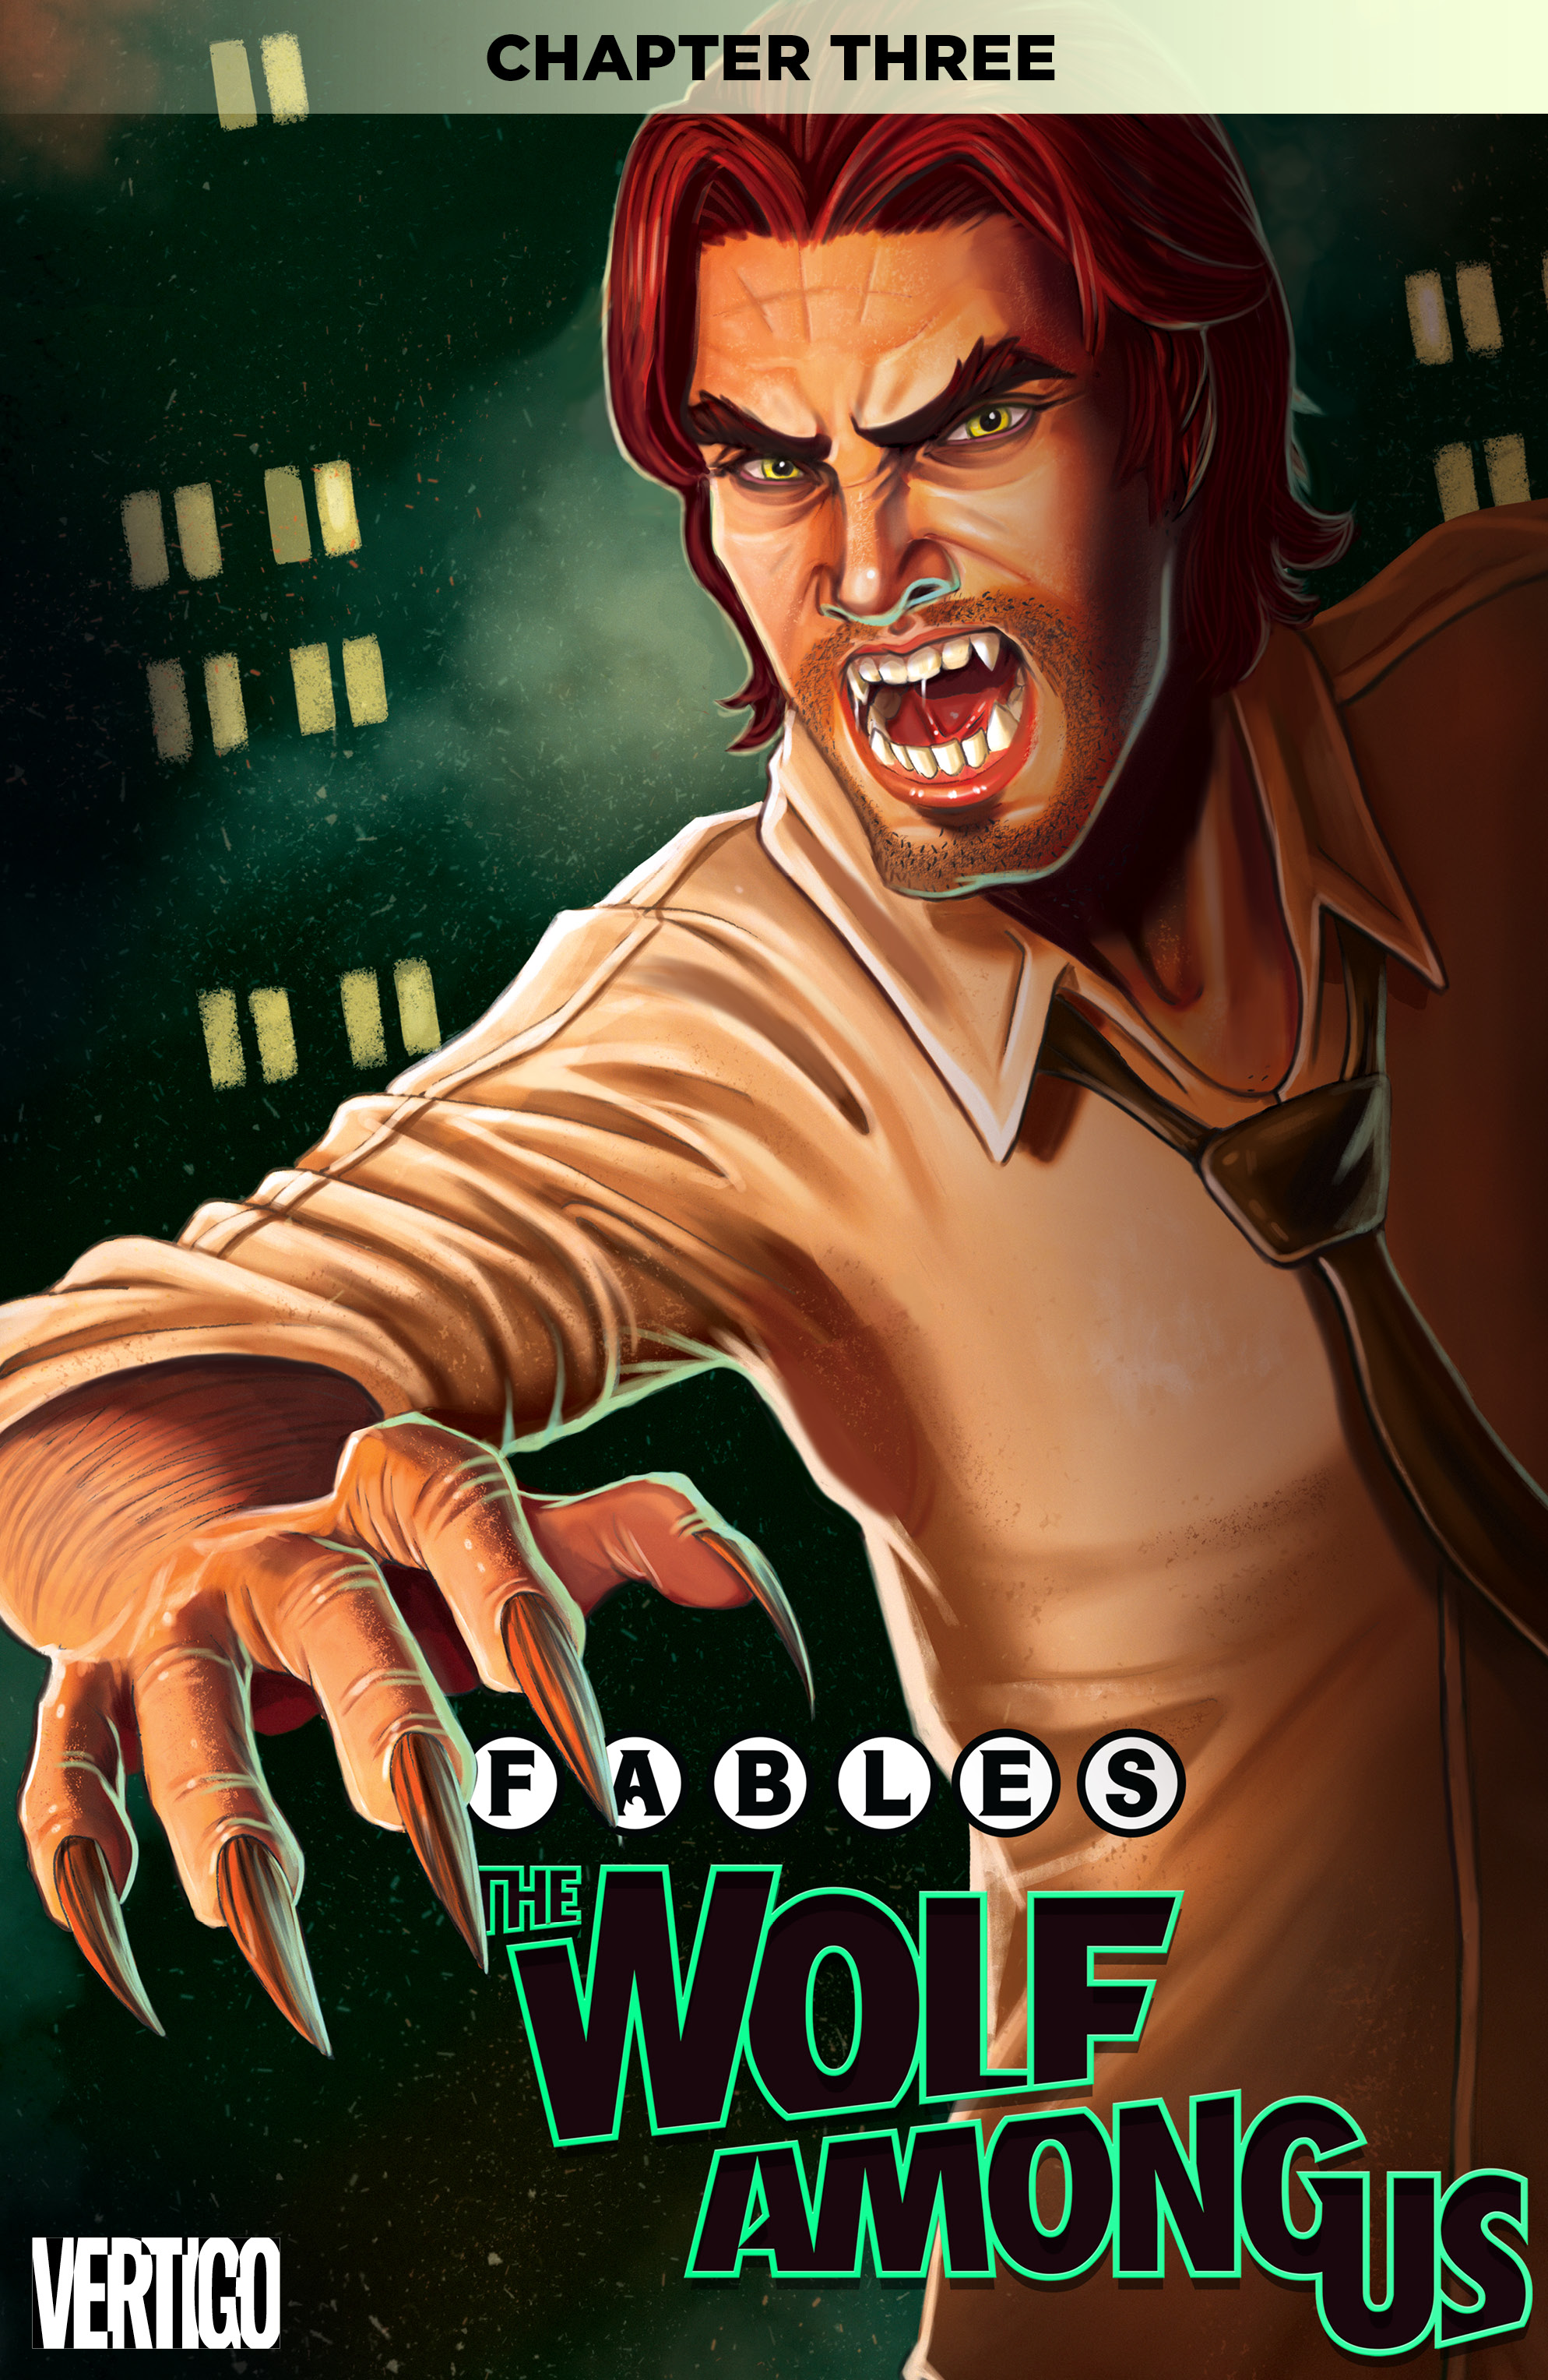 Fables: The Wolf Among Us #3 preview images